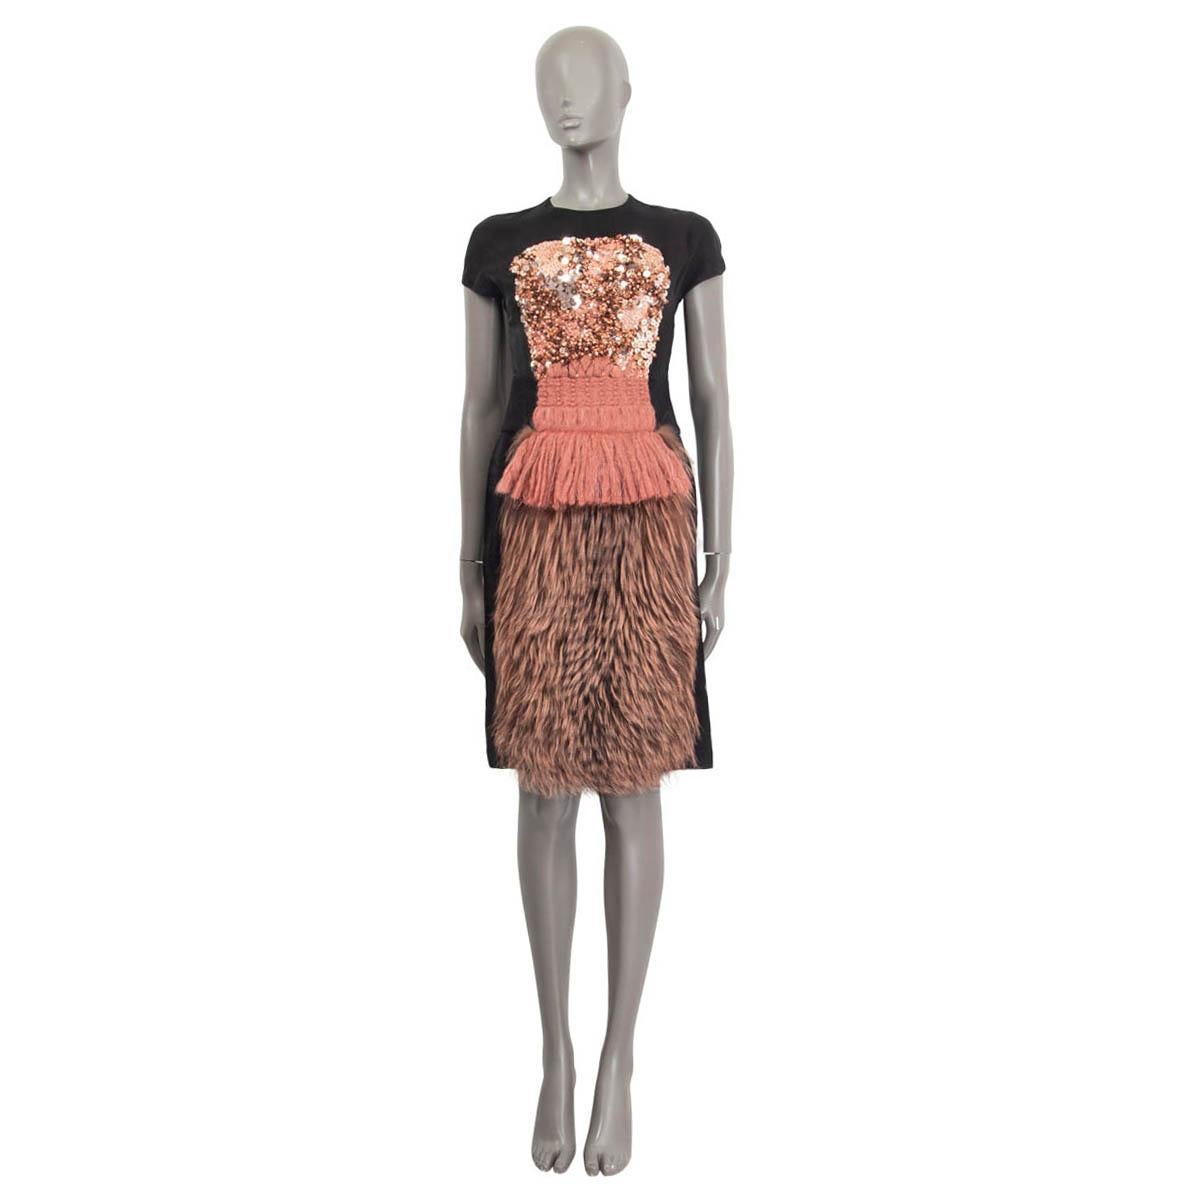 100% authentic Fendi sheath dress in black viscose (53%) and silk (47%). Embellished with an attached dress out of fox fur, mohair, pearls and sequins on the front of the dress. Opens with a concealed zipper and a hook on the back. Lined in black